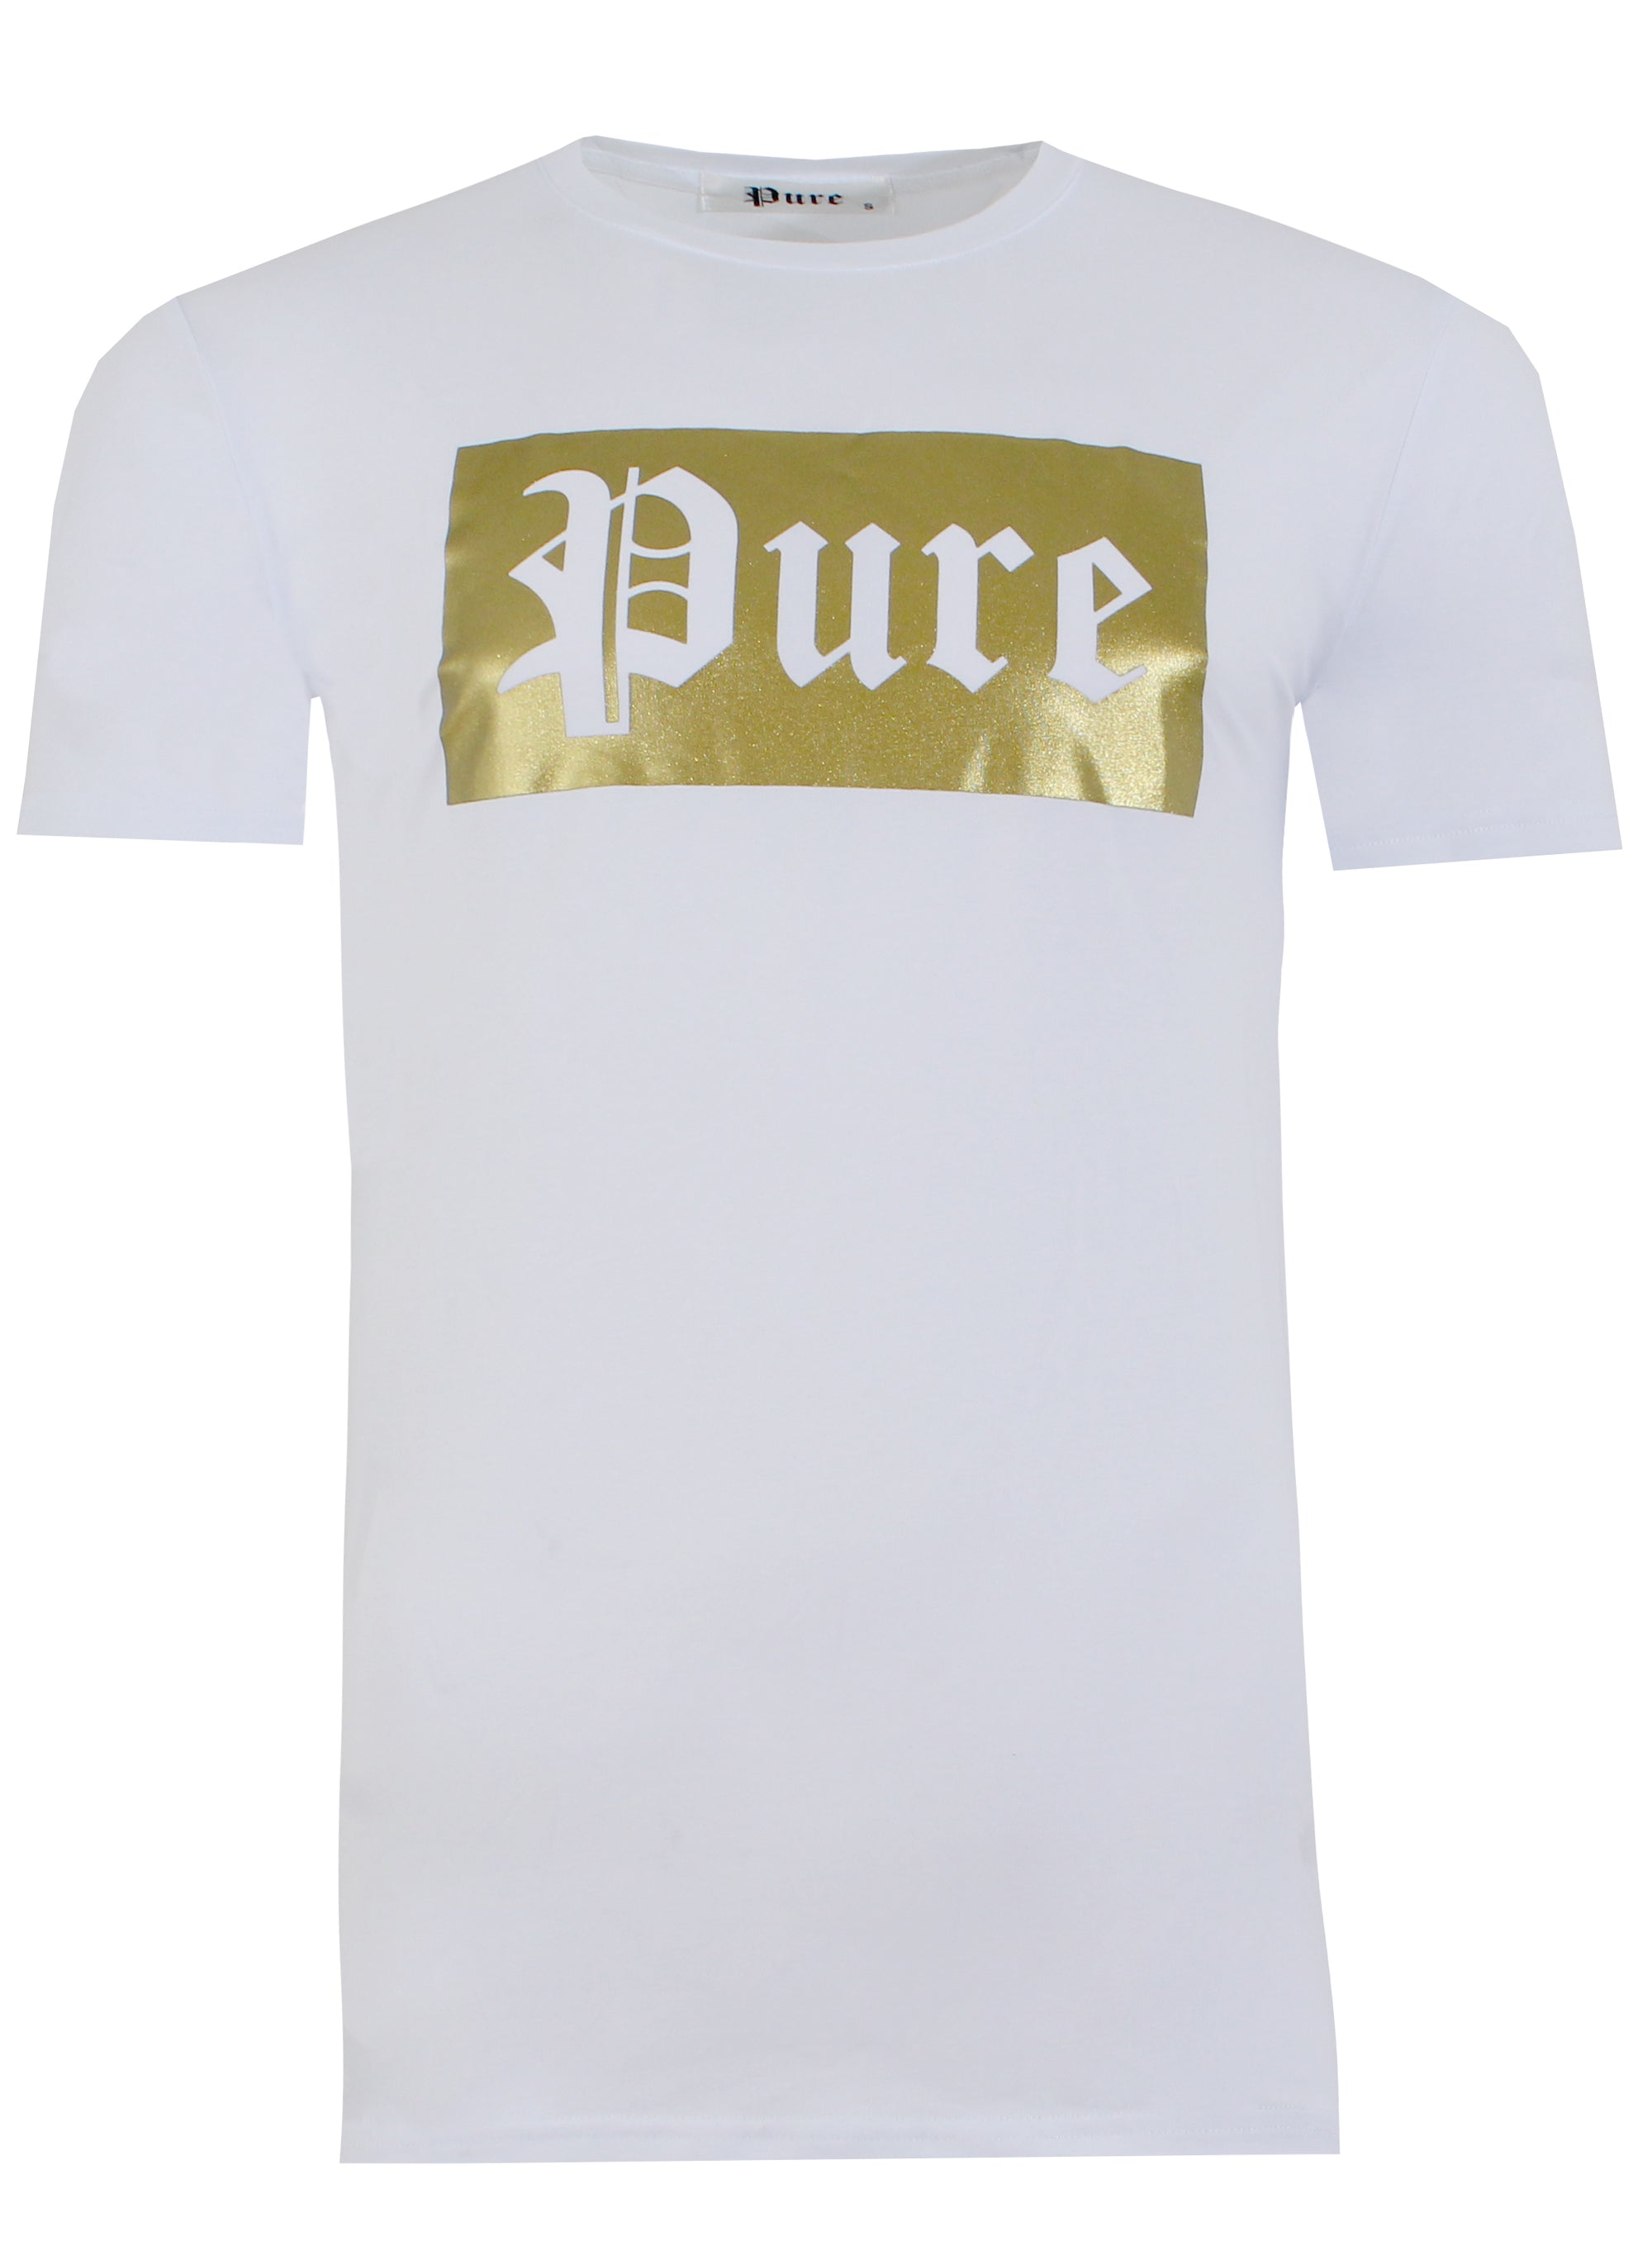 New 2021 Stretch Pure Tee with Block Logo - White & Gold